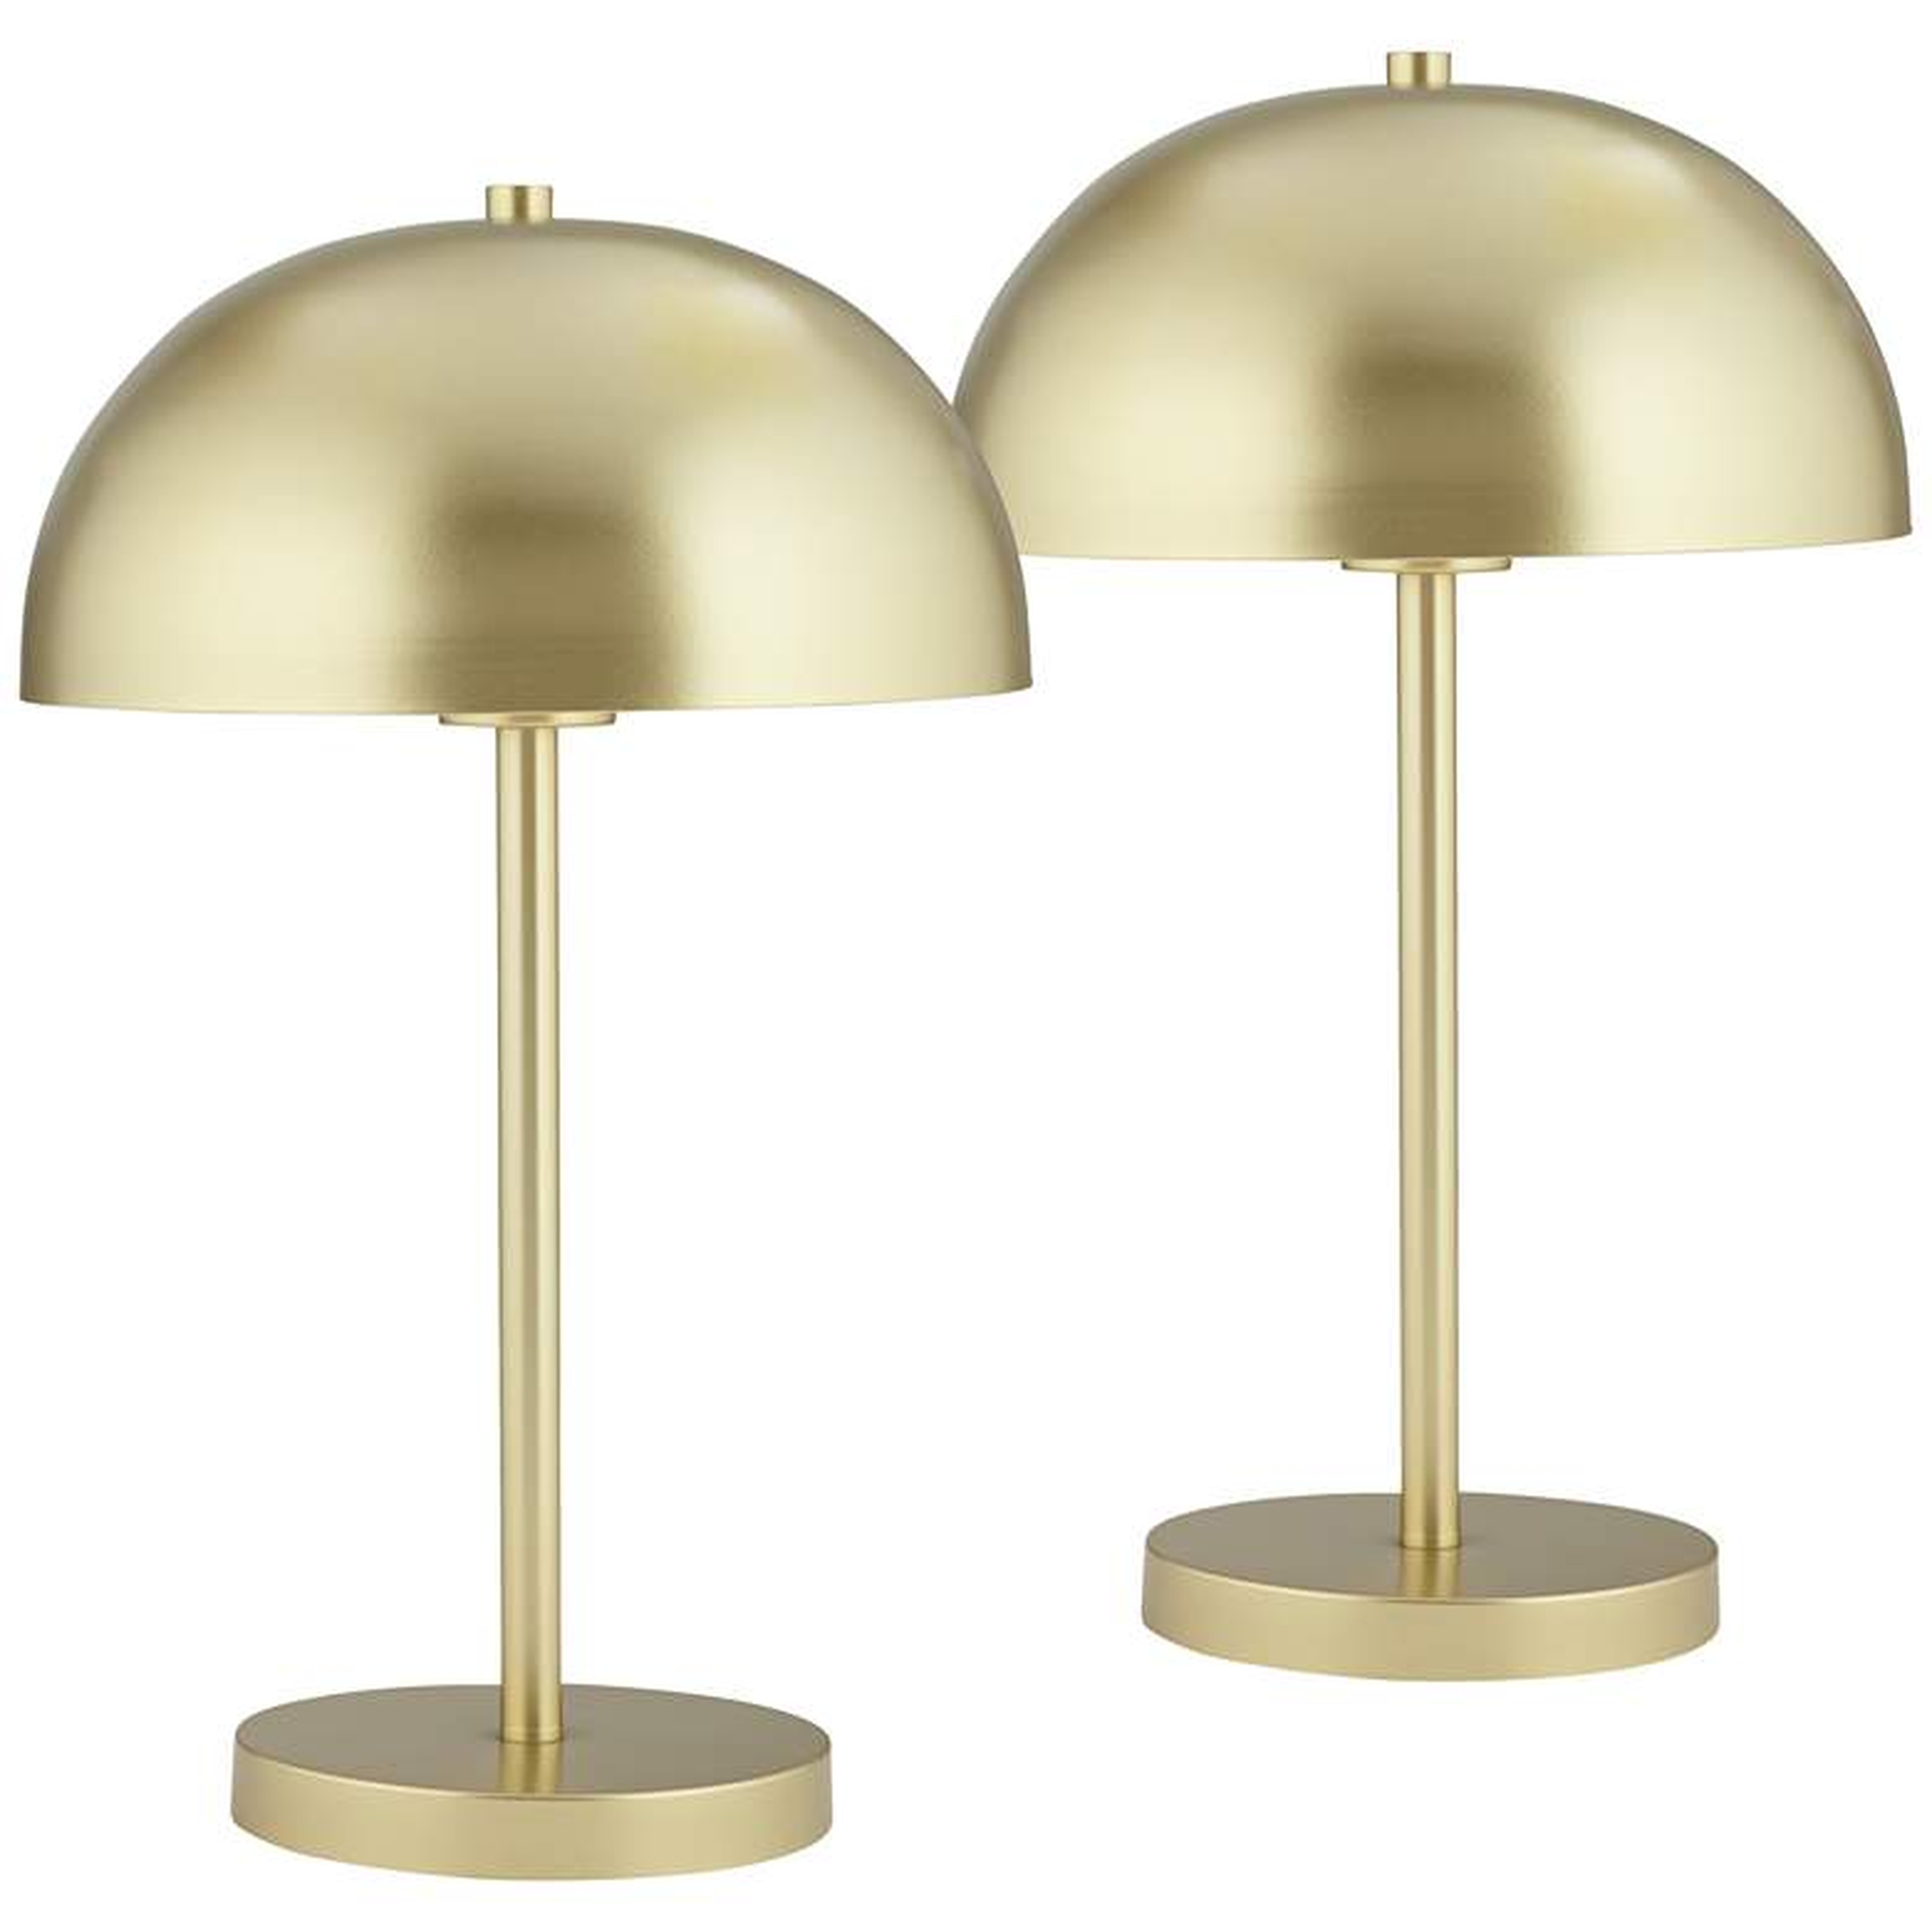 Rhys Luxe Dome Table Lamps, Gold, Set of 2 - Lamps Plus